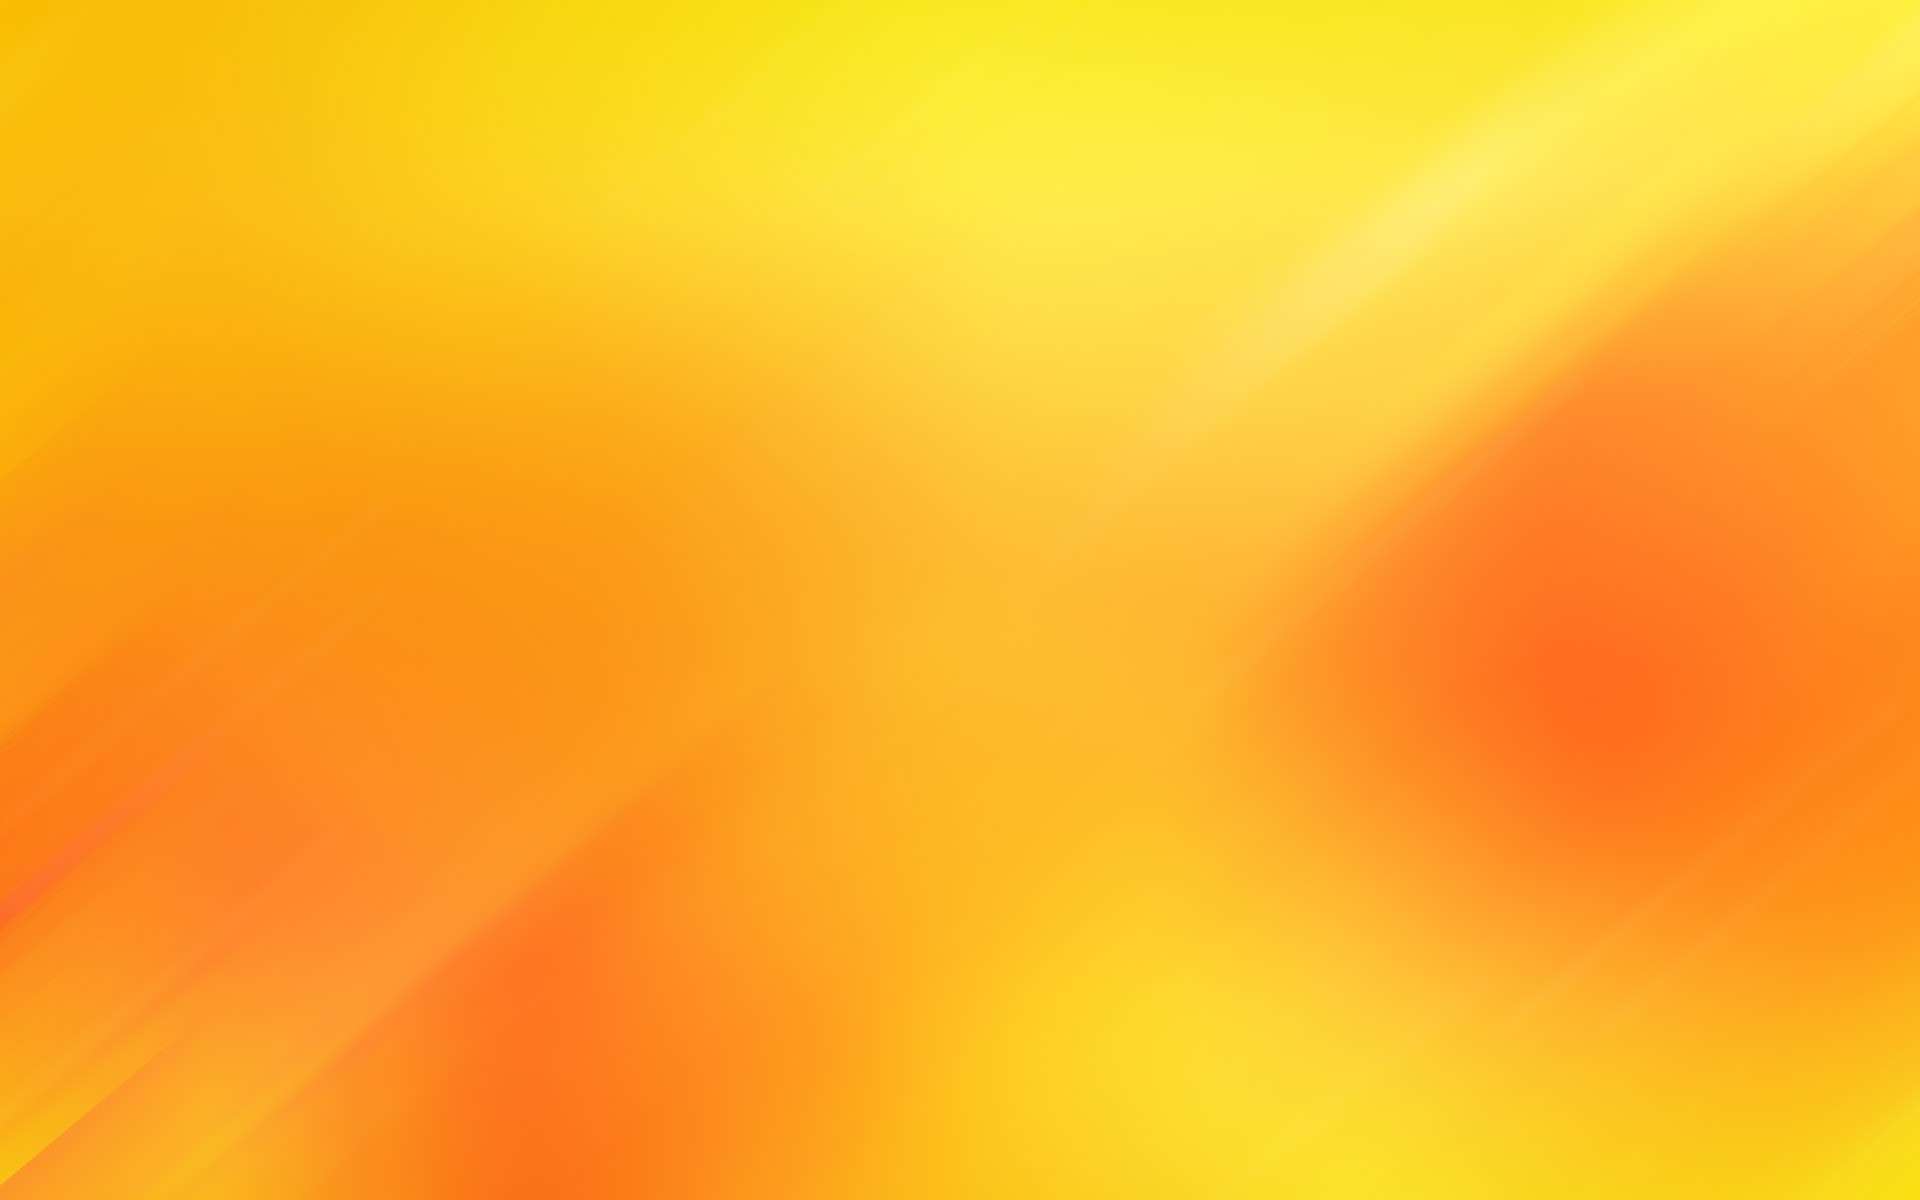 Latest 777 Background orange gradient Design Ideas for Your Projects